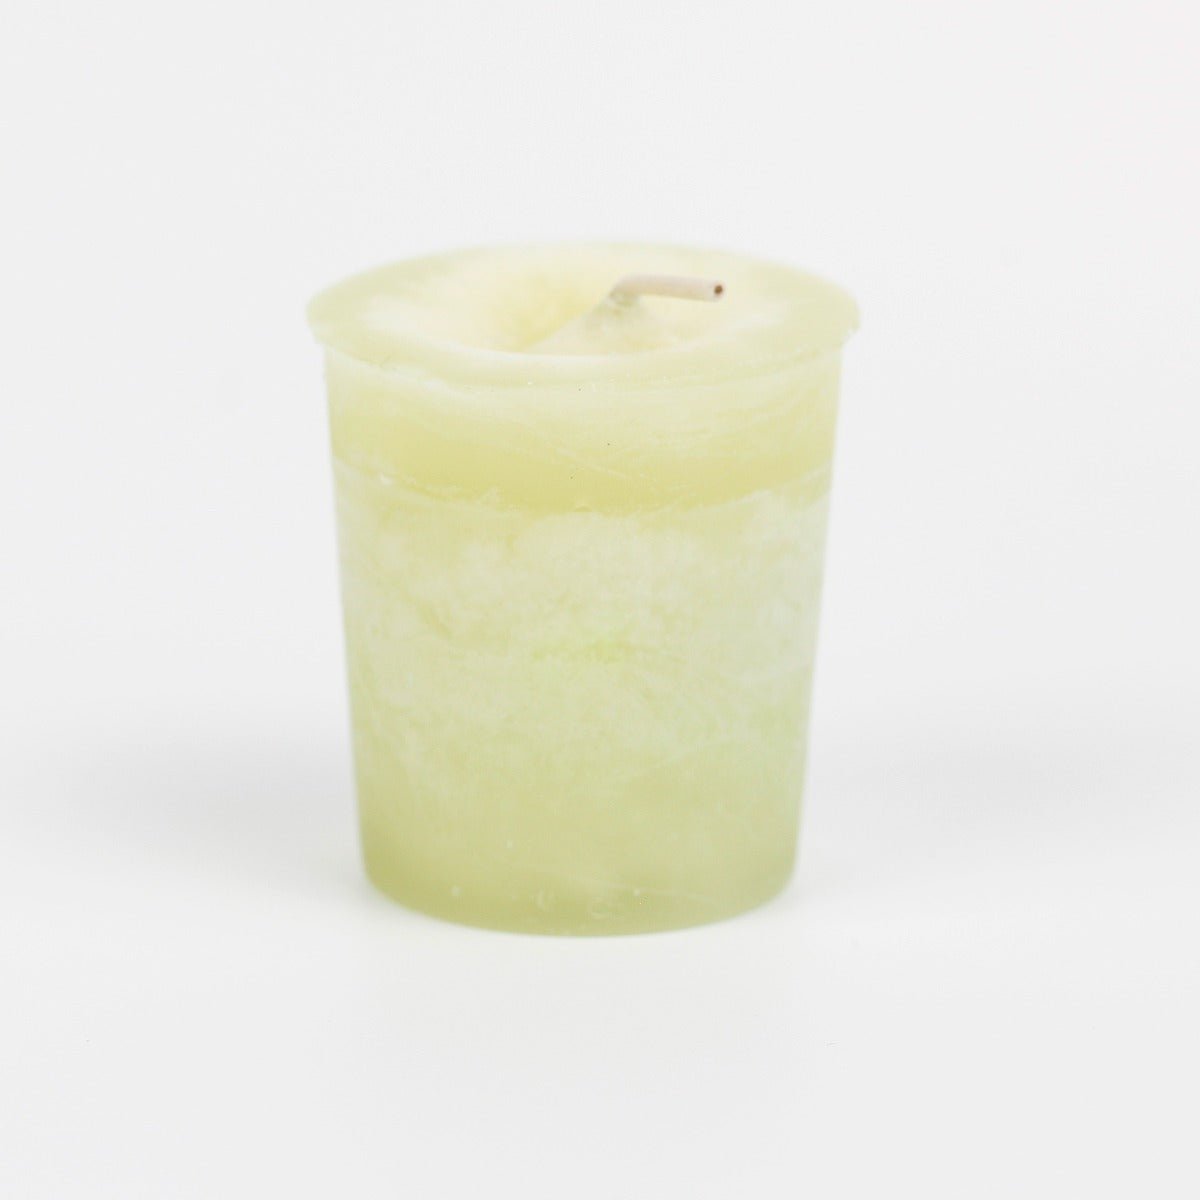 Rosemary Scented Votive - 13 Moons